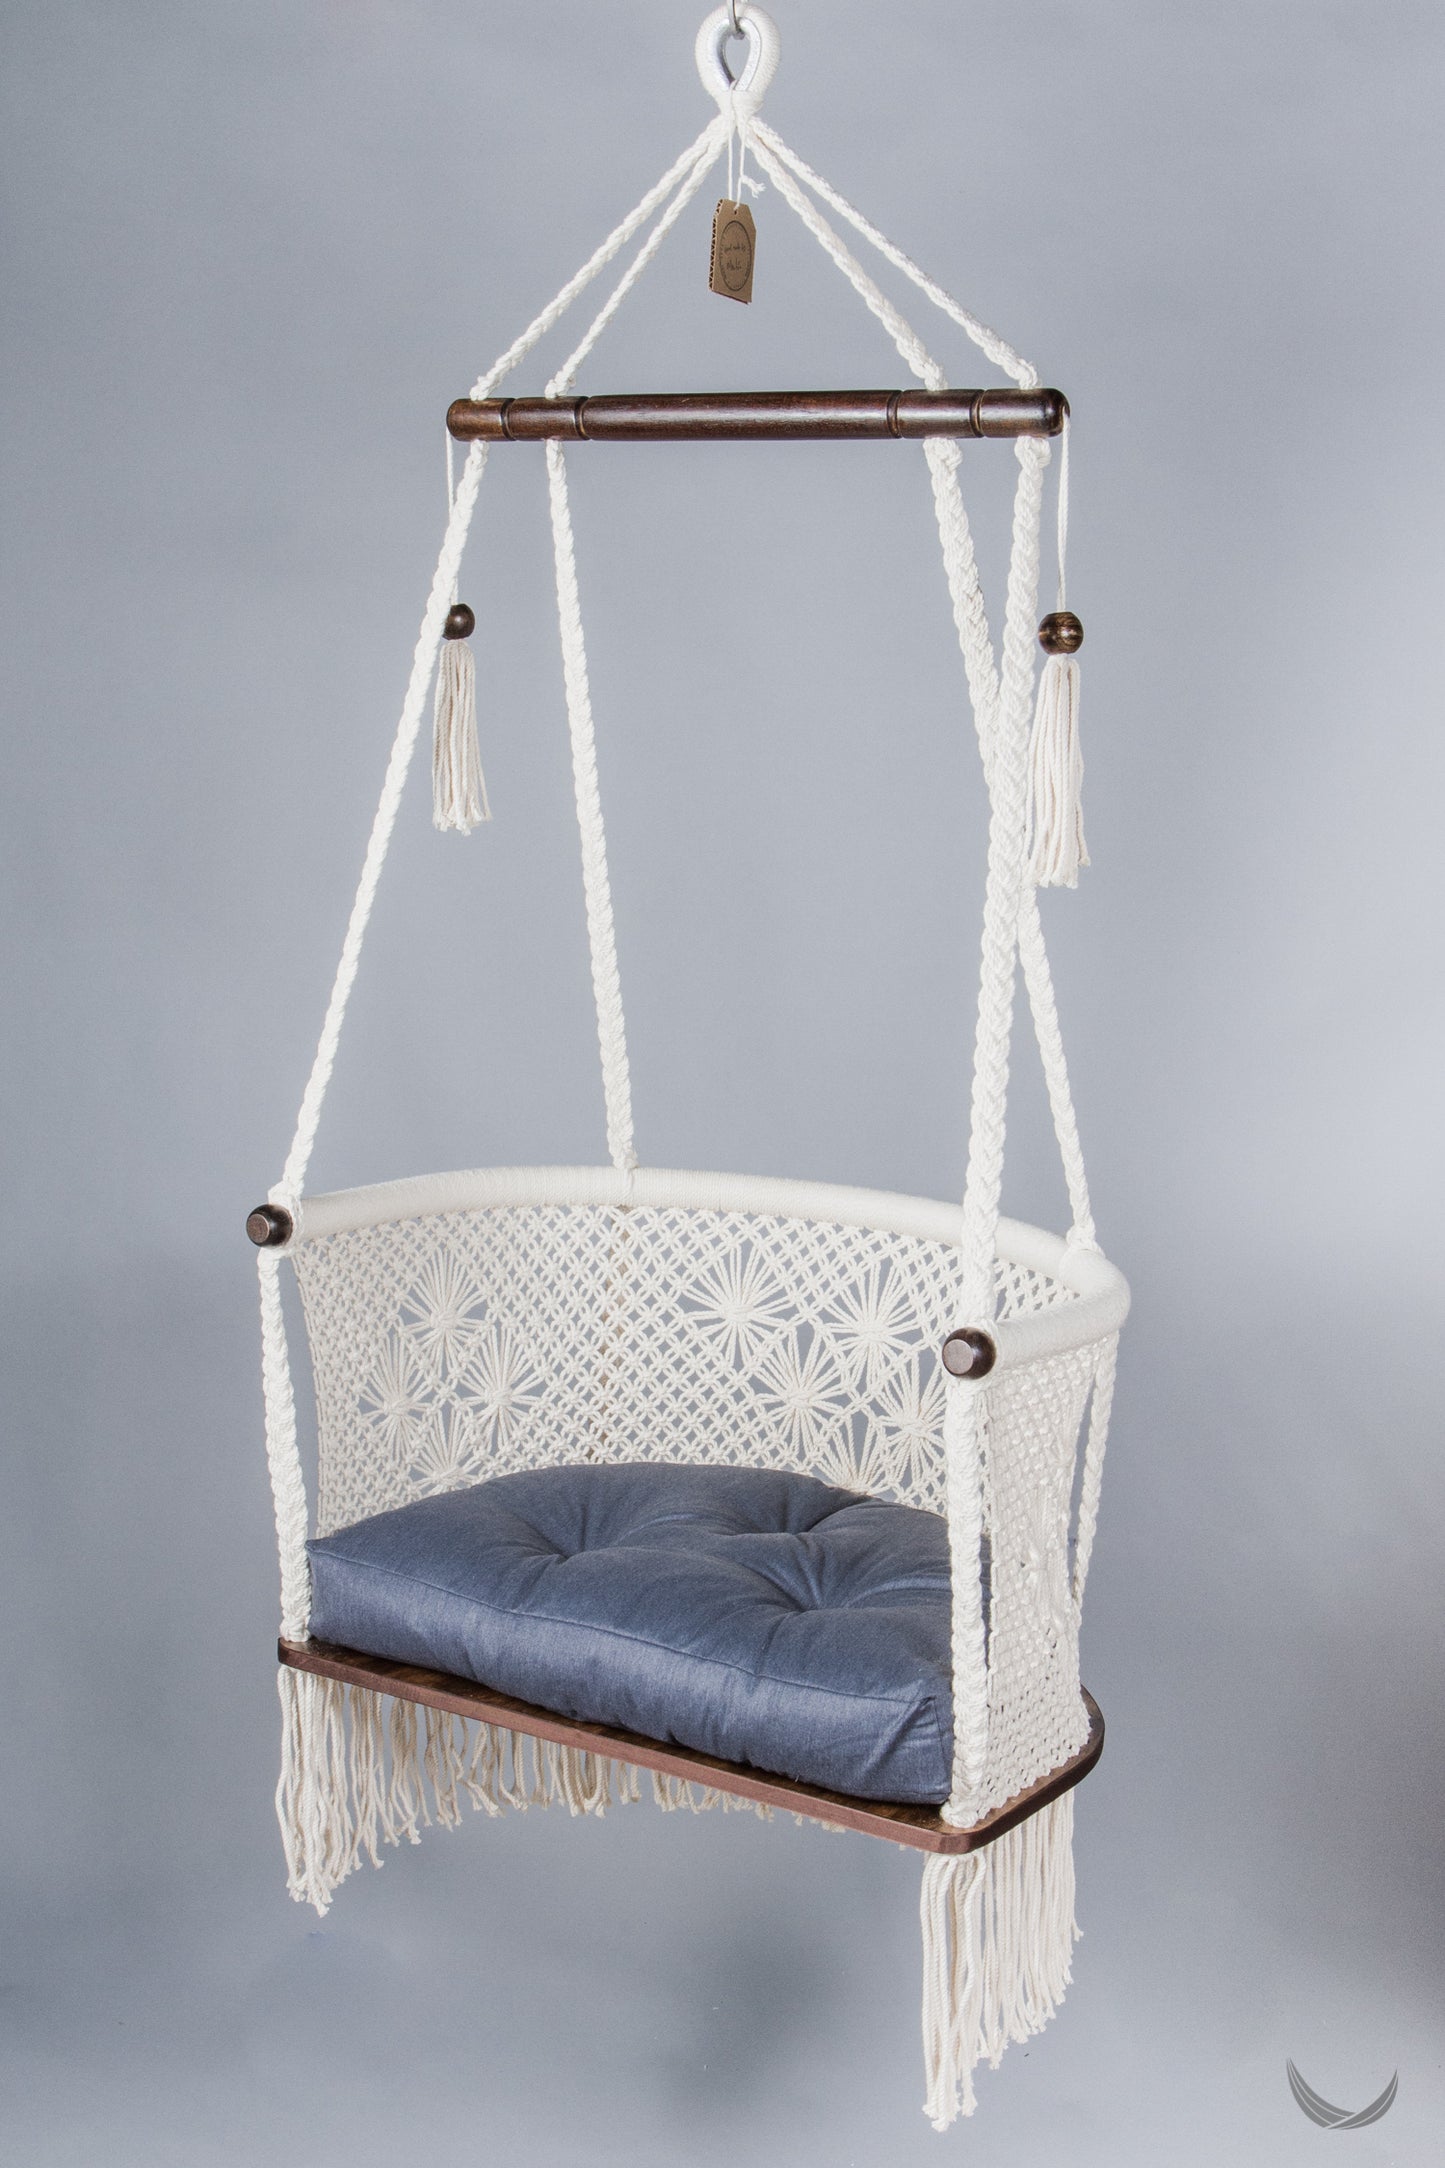 ivory color hanging chair with a blue color cushion